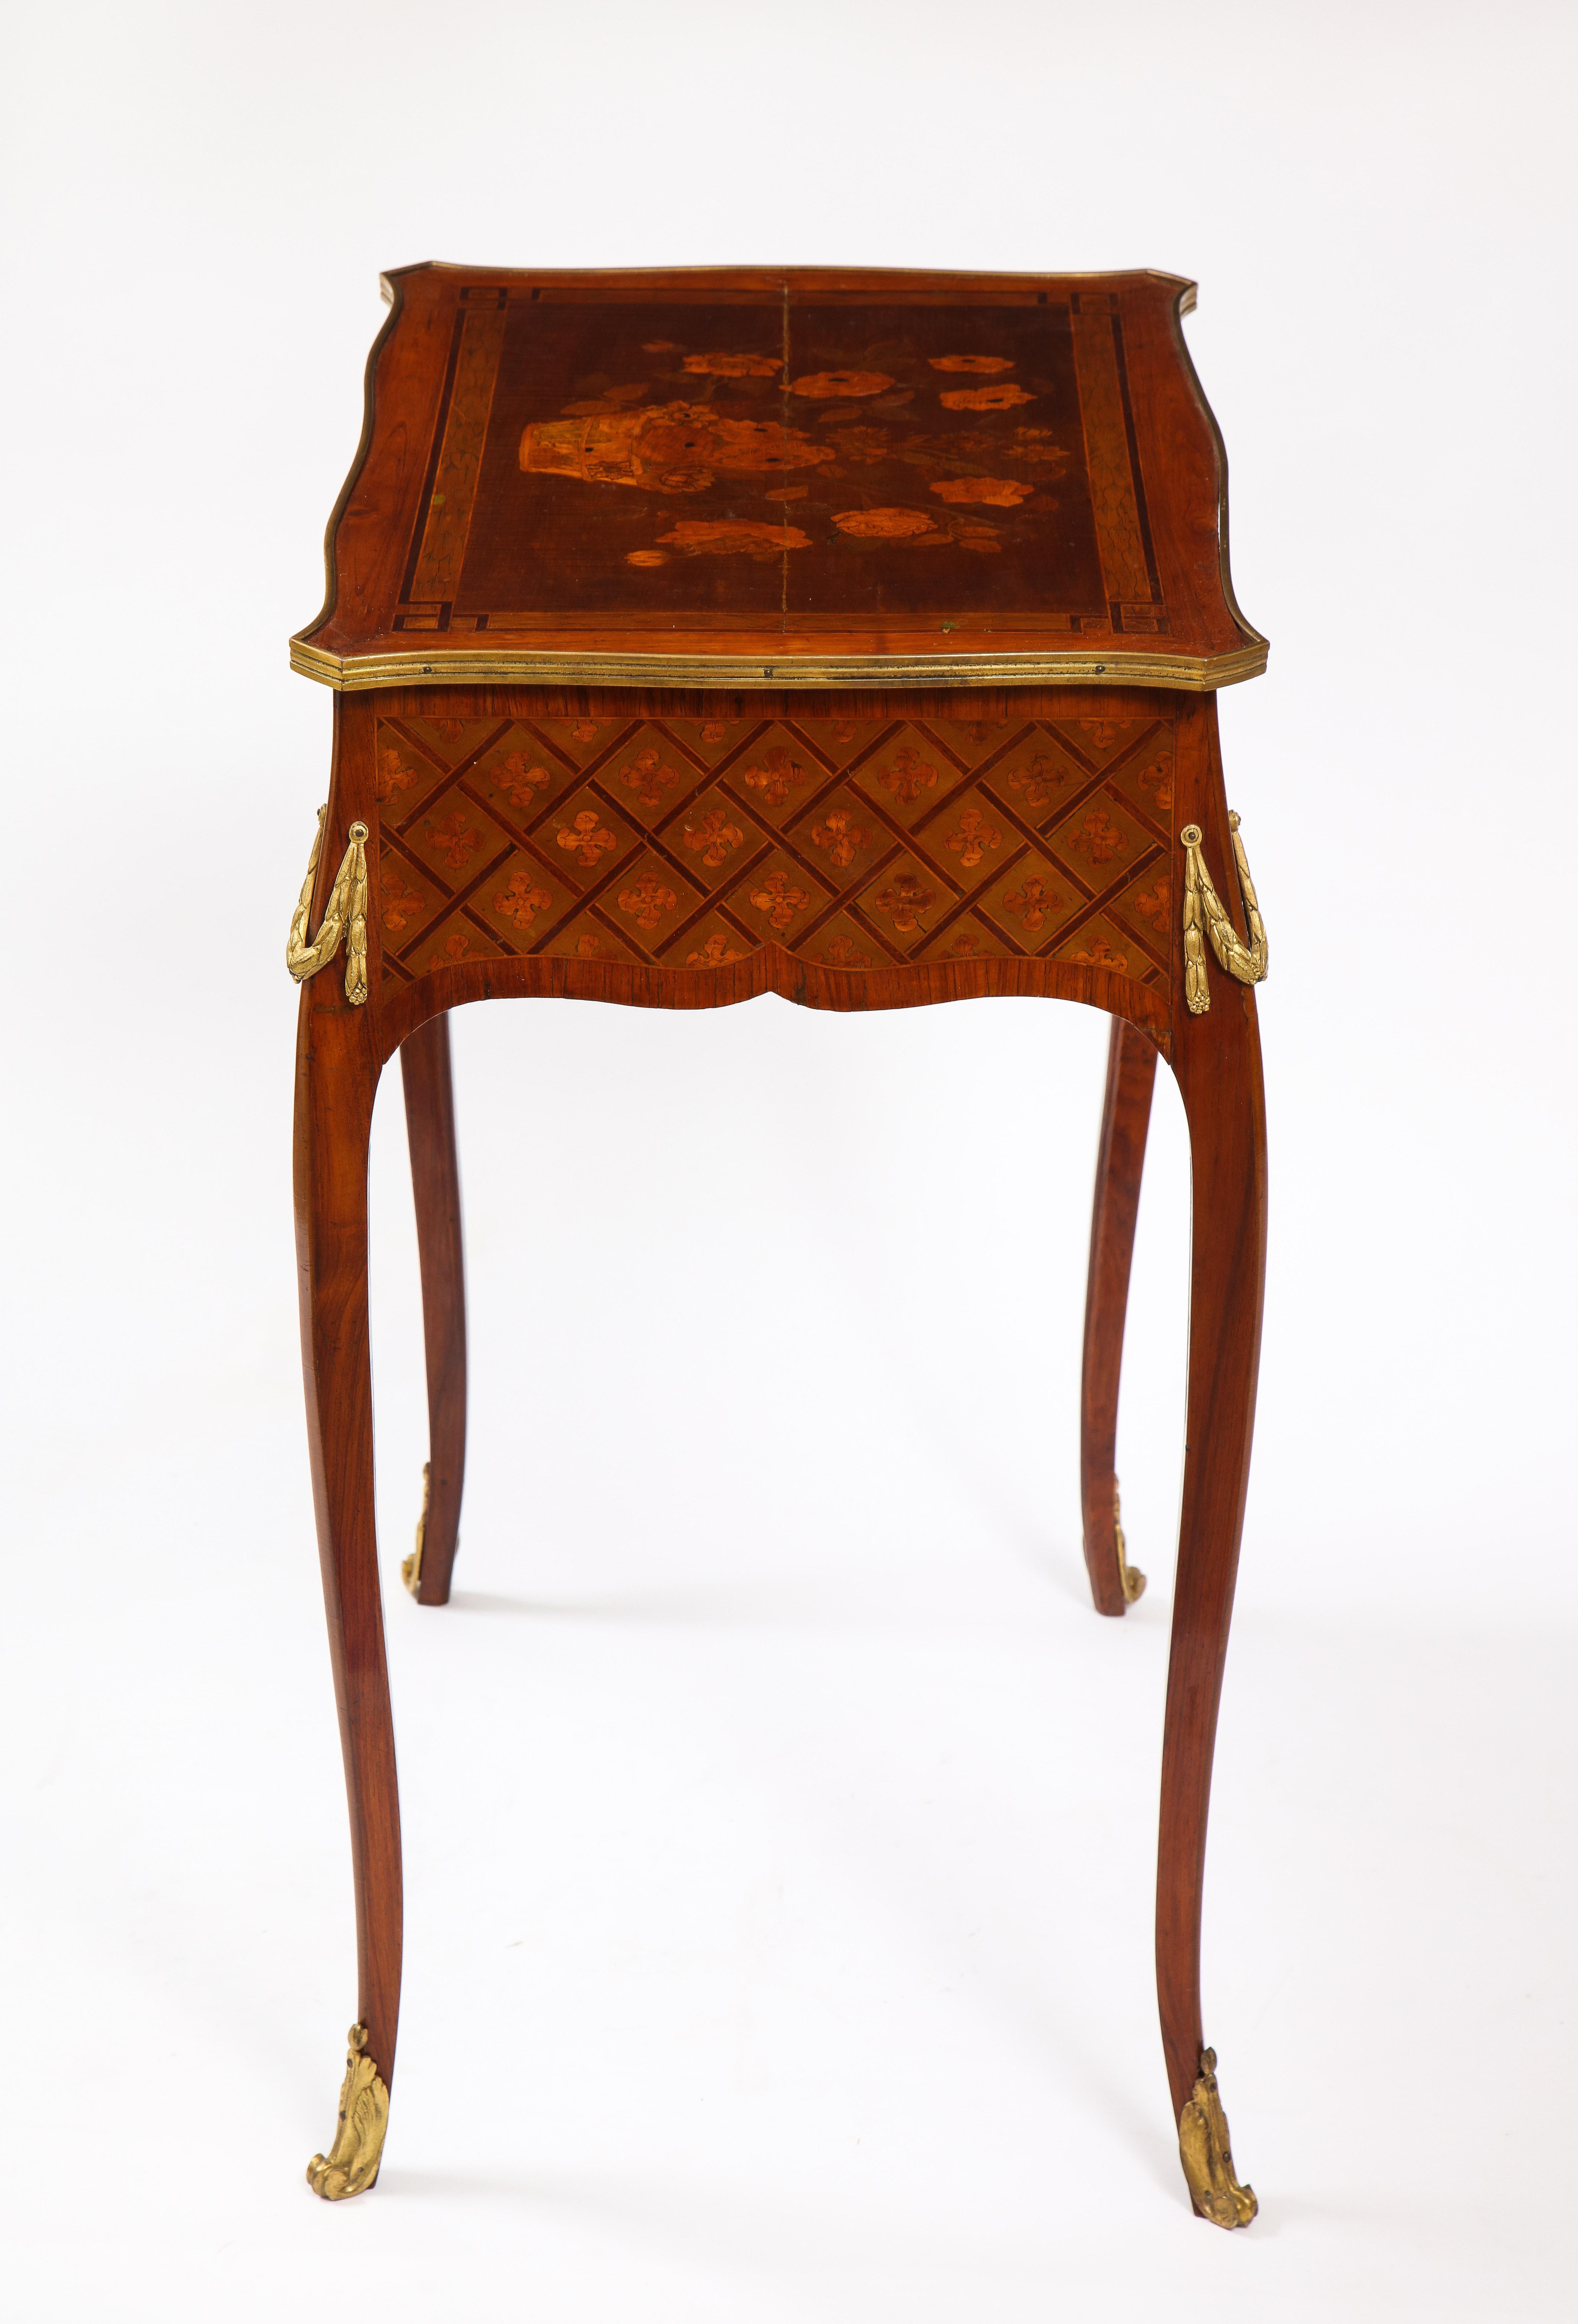 Late 18th Century French Louis XVI Period Dore Bronze Mounted Marquetry and Parquetry Side Table